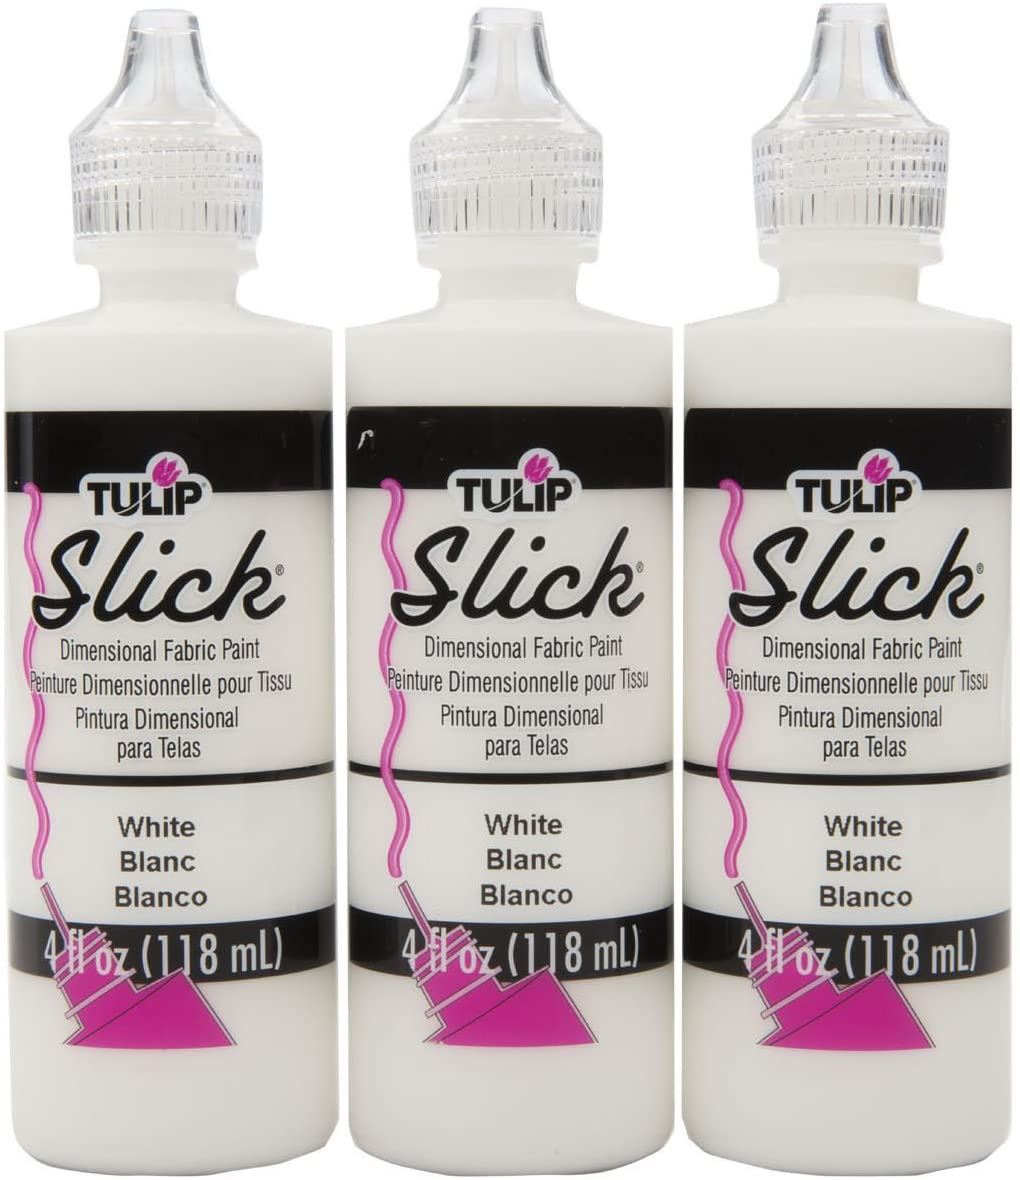 Tulip Slick Black Dimensional Fabric Paint (3-Pack) 37562 - The Home Depot